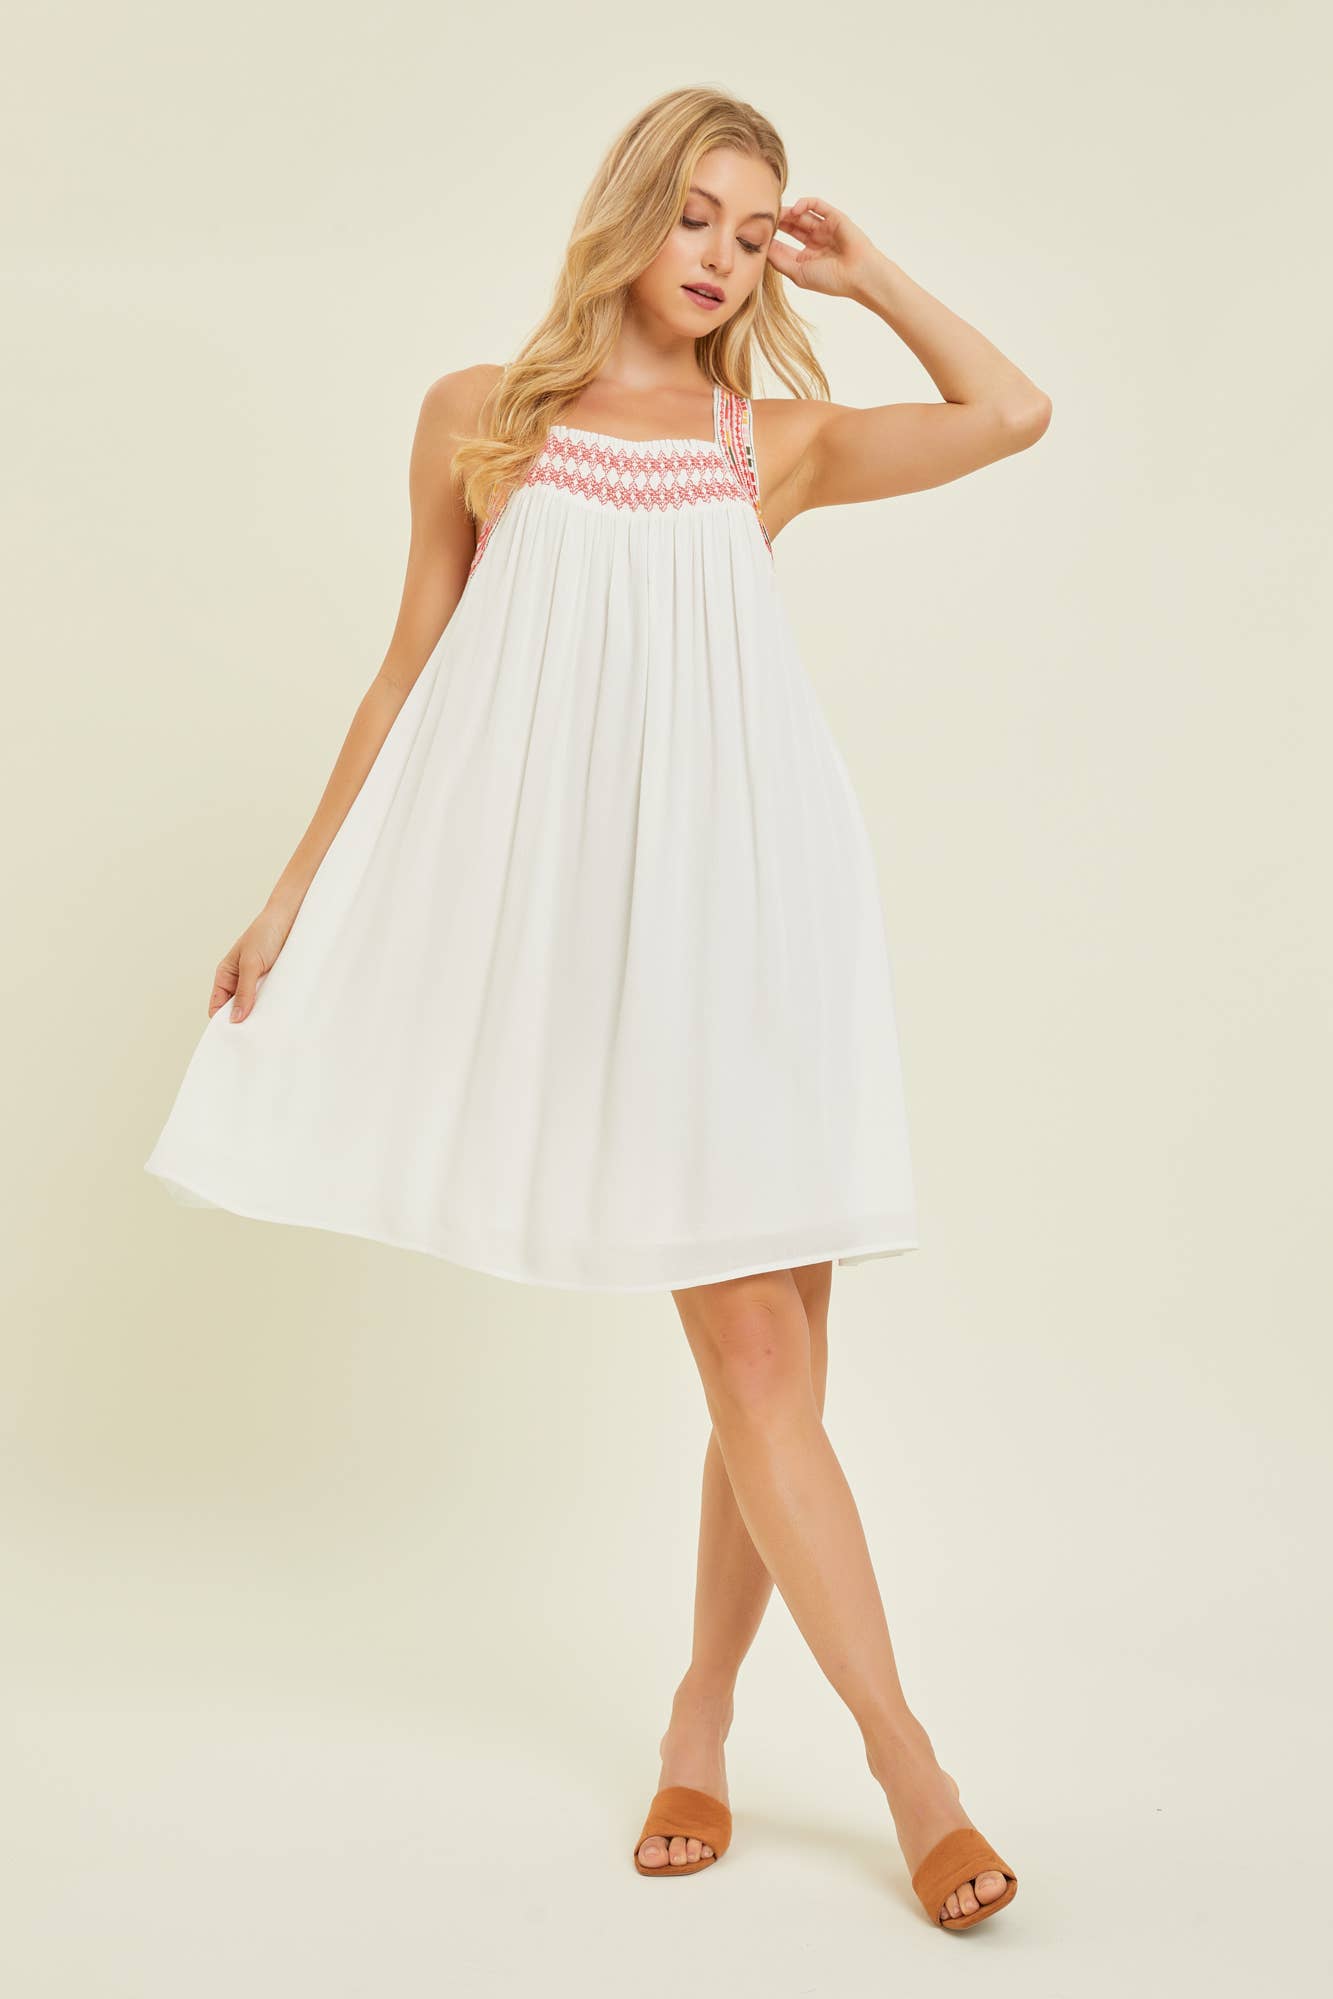 White Guaze Dress with Embroidery Detailing